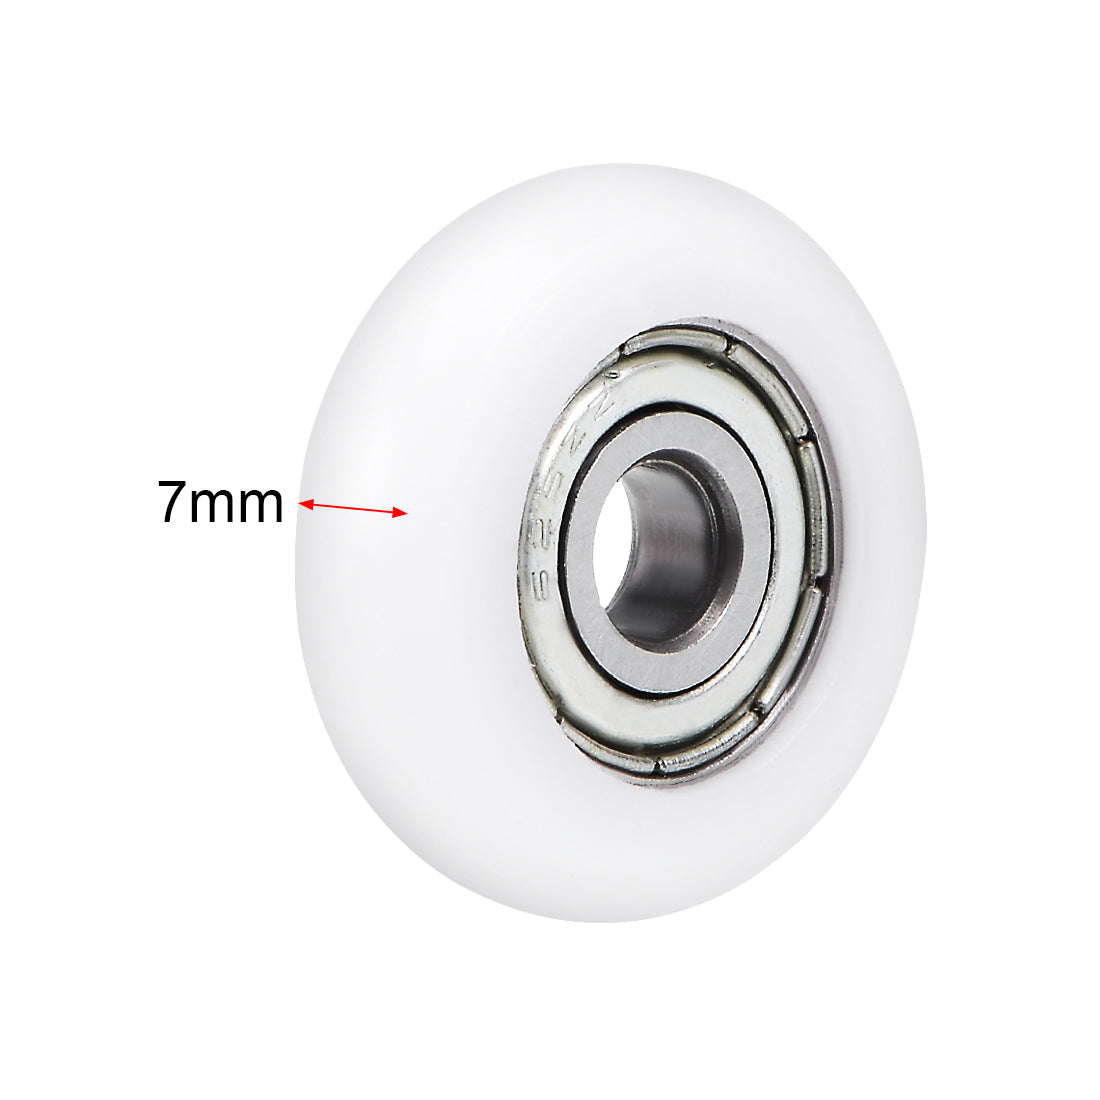 uxcell Uxcell 625ZZ Plastic Coated Ball Bearing 5x23x7mm for Door Windows Furniture Pulley 3pcs